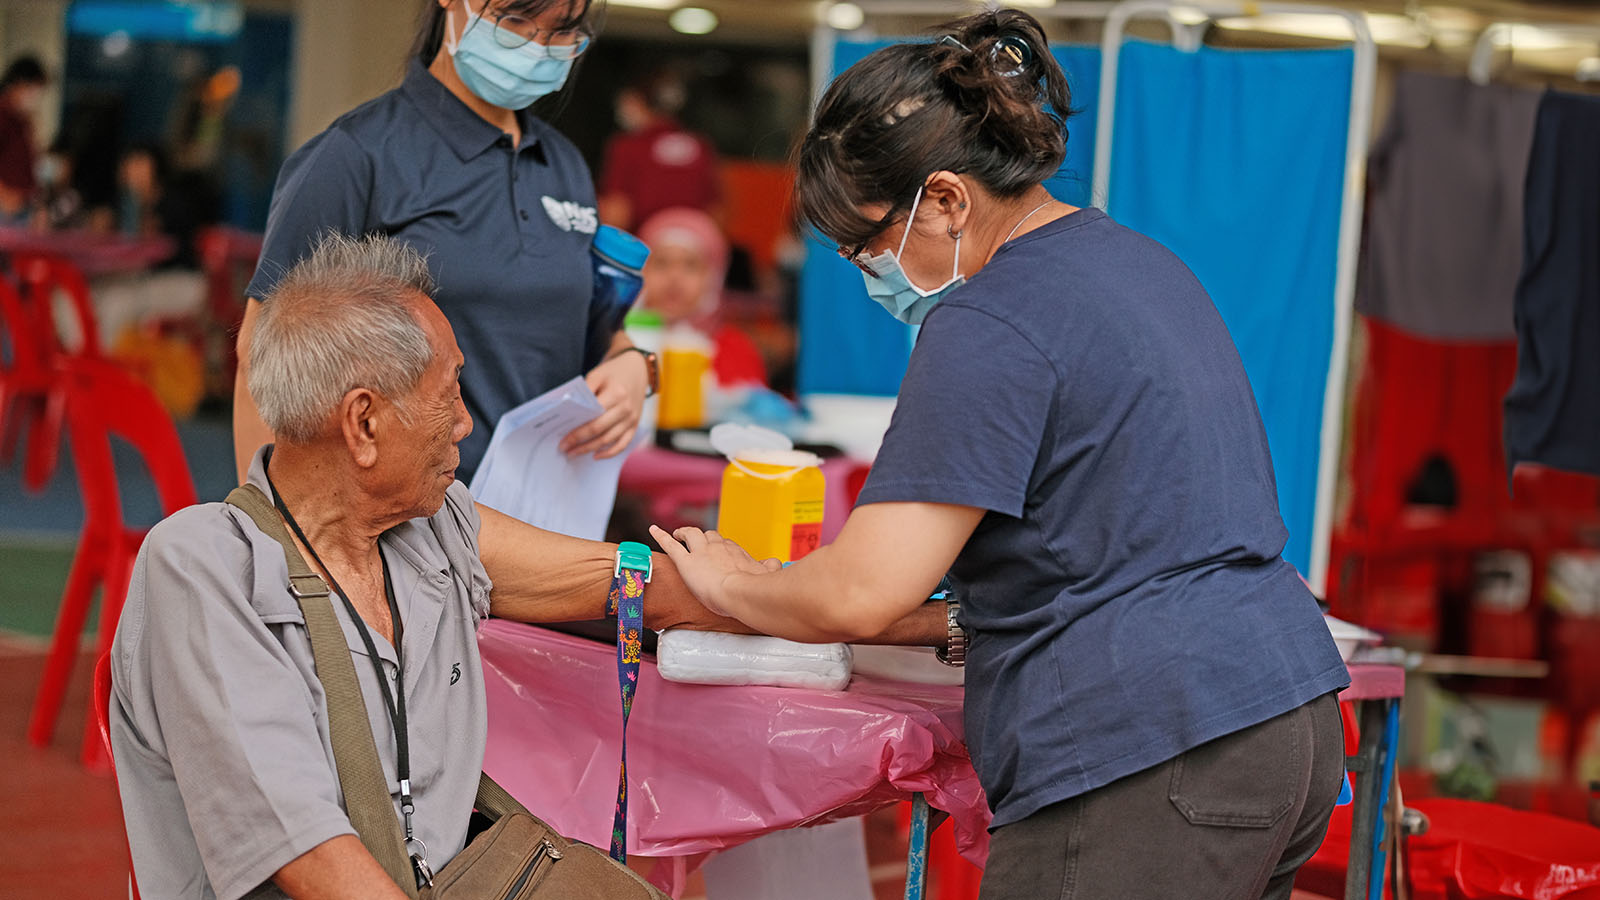 An elderly resident accompanied by a volunteer, to have his blood taken at the phlebotomy station during NHS 2023.